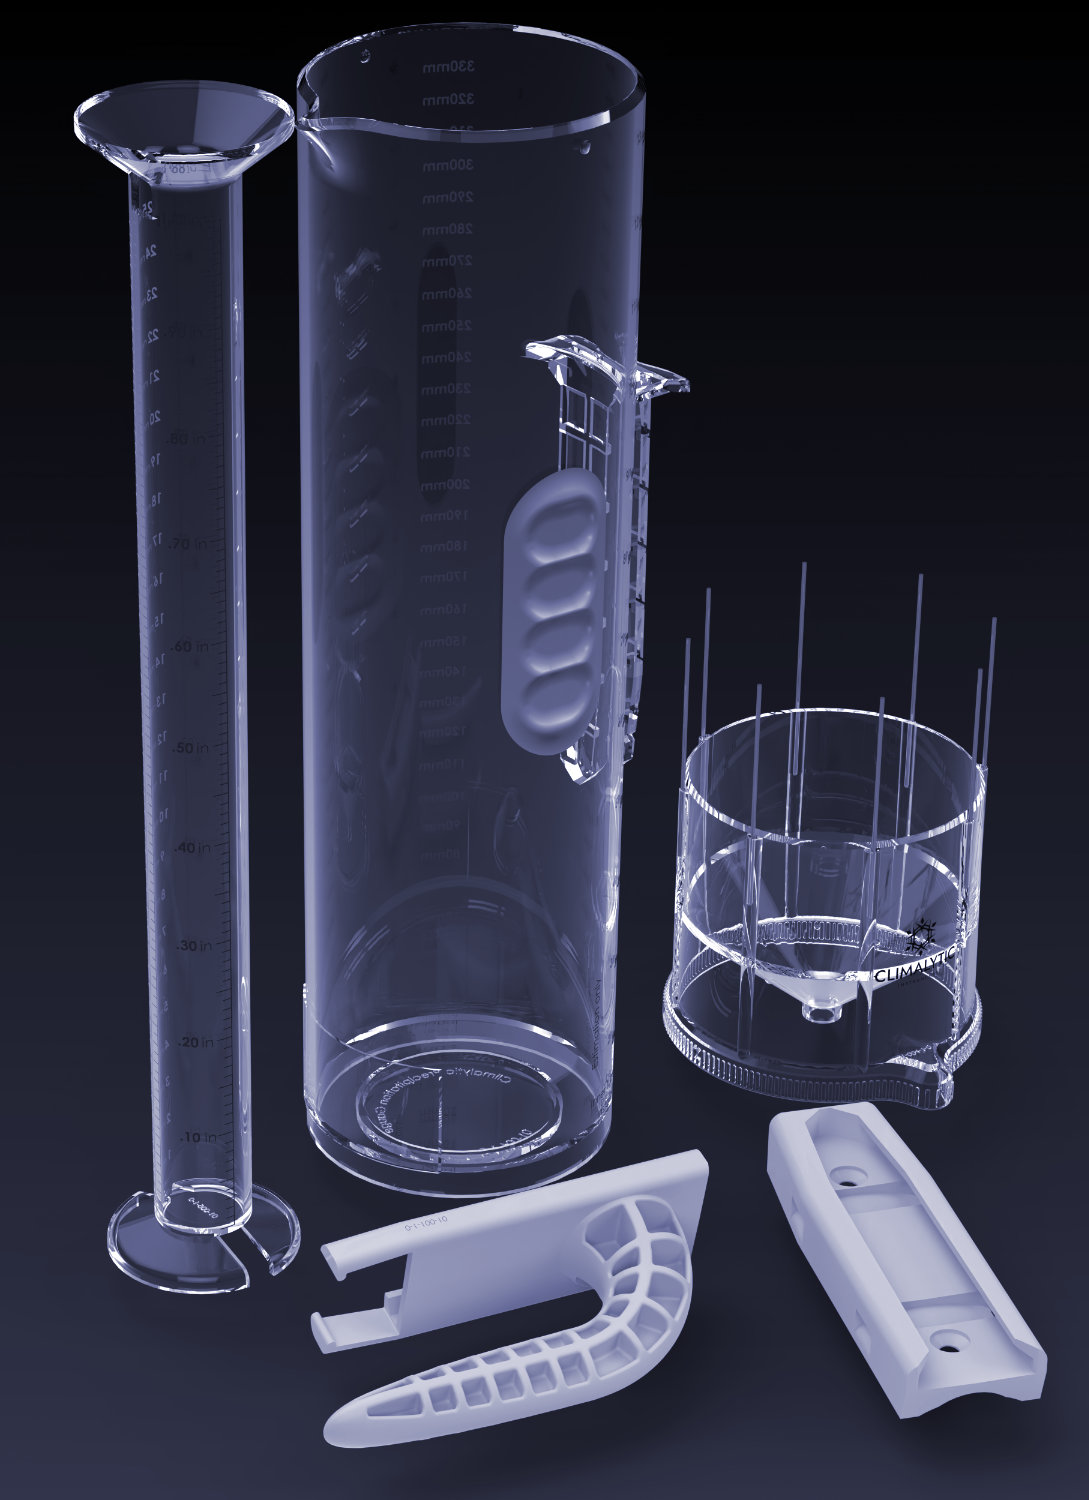 TROPO rain gauge manufactured by Climalytic Instruments LLC